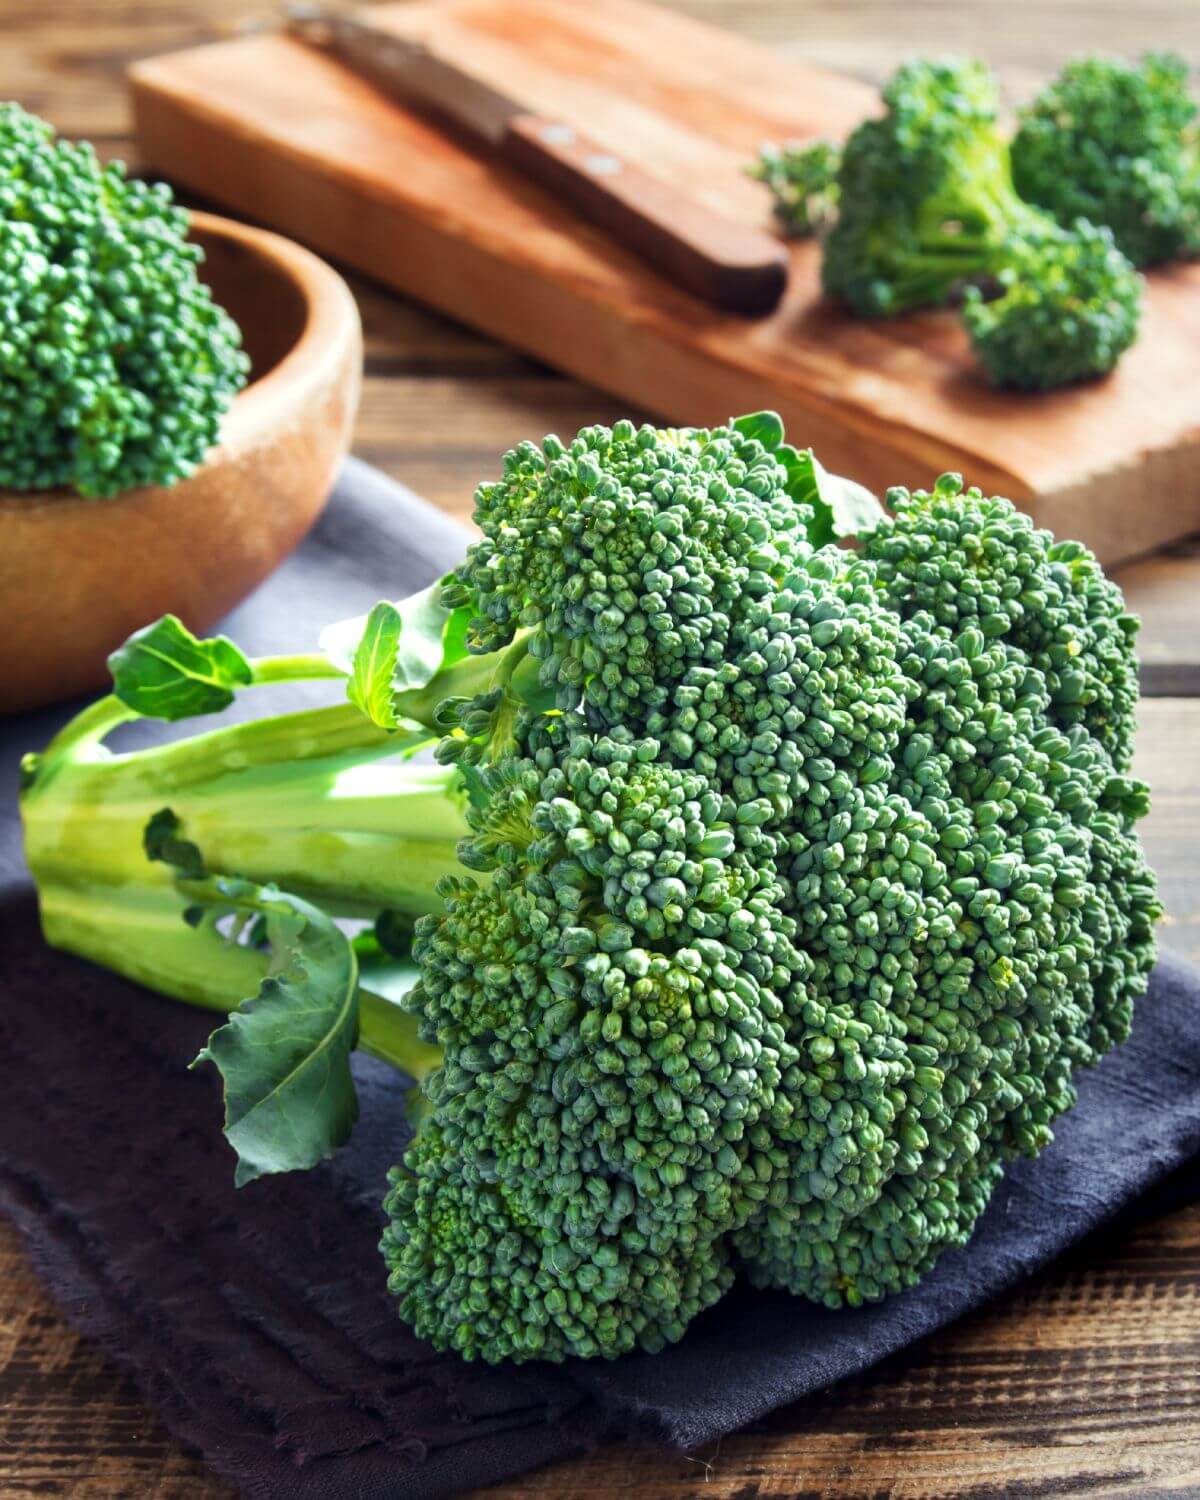 A head of broccoli to be cut.